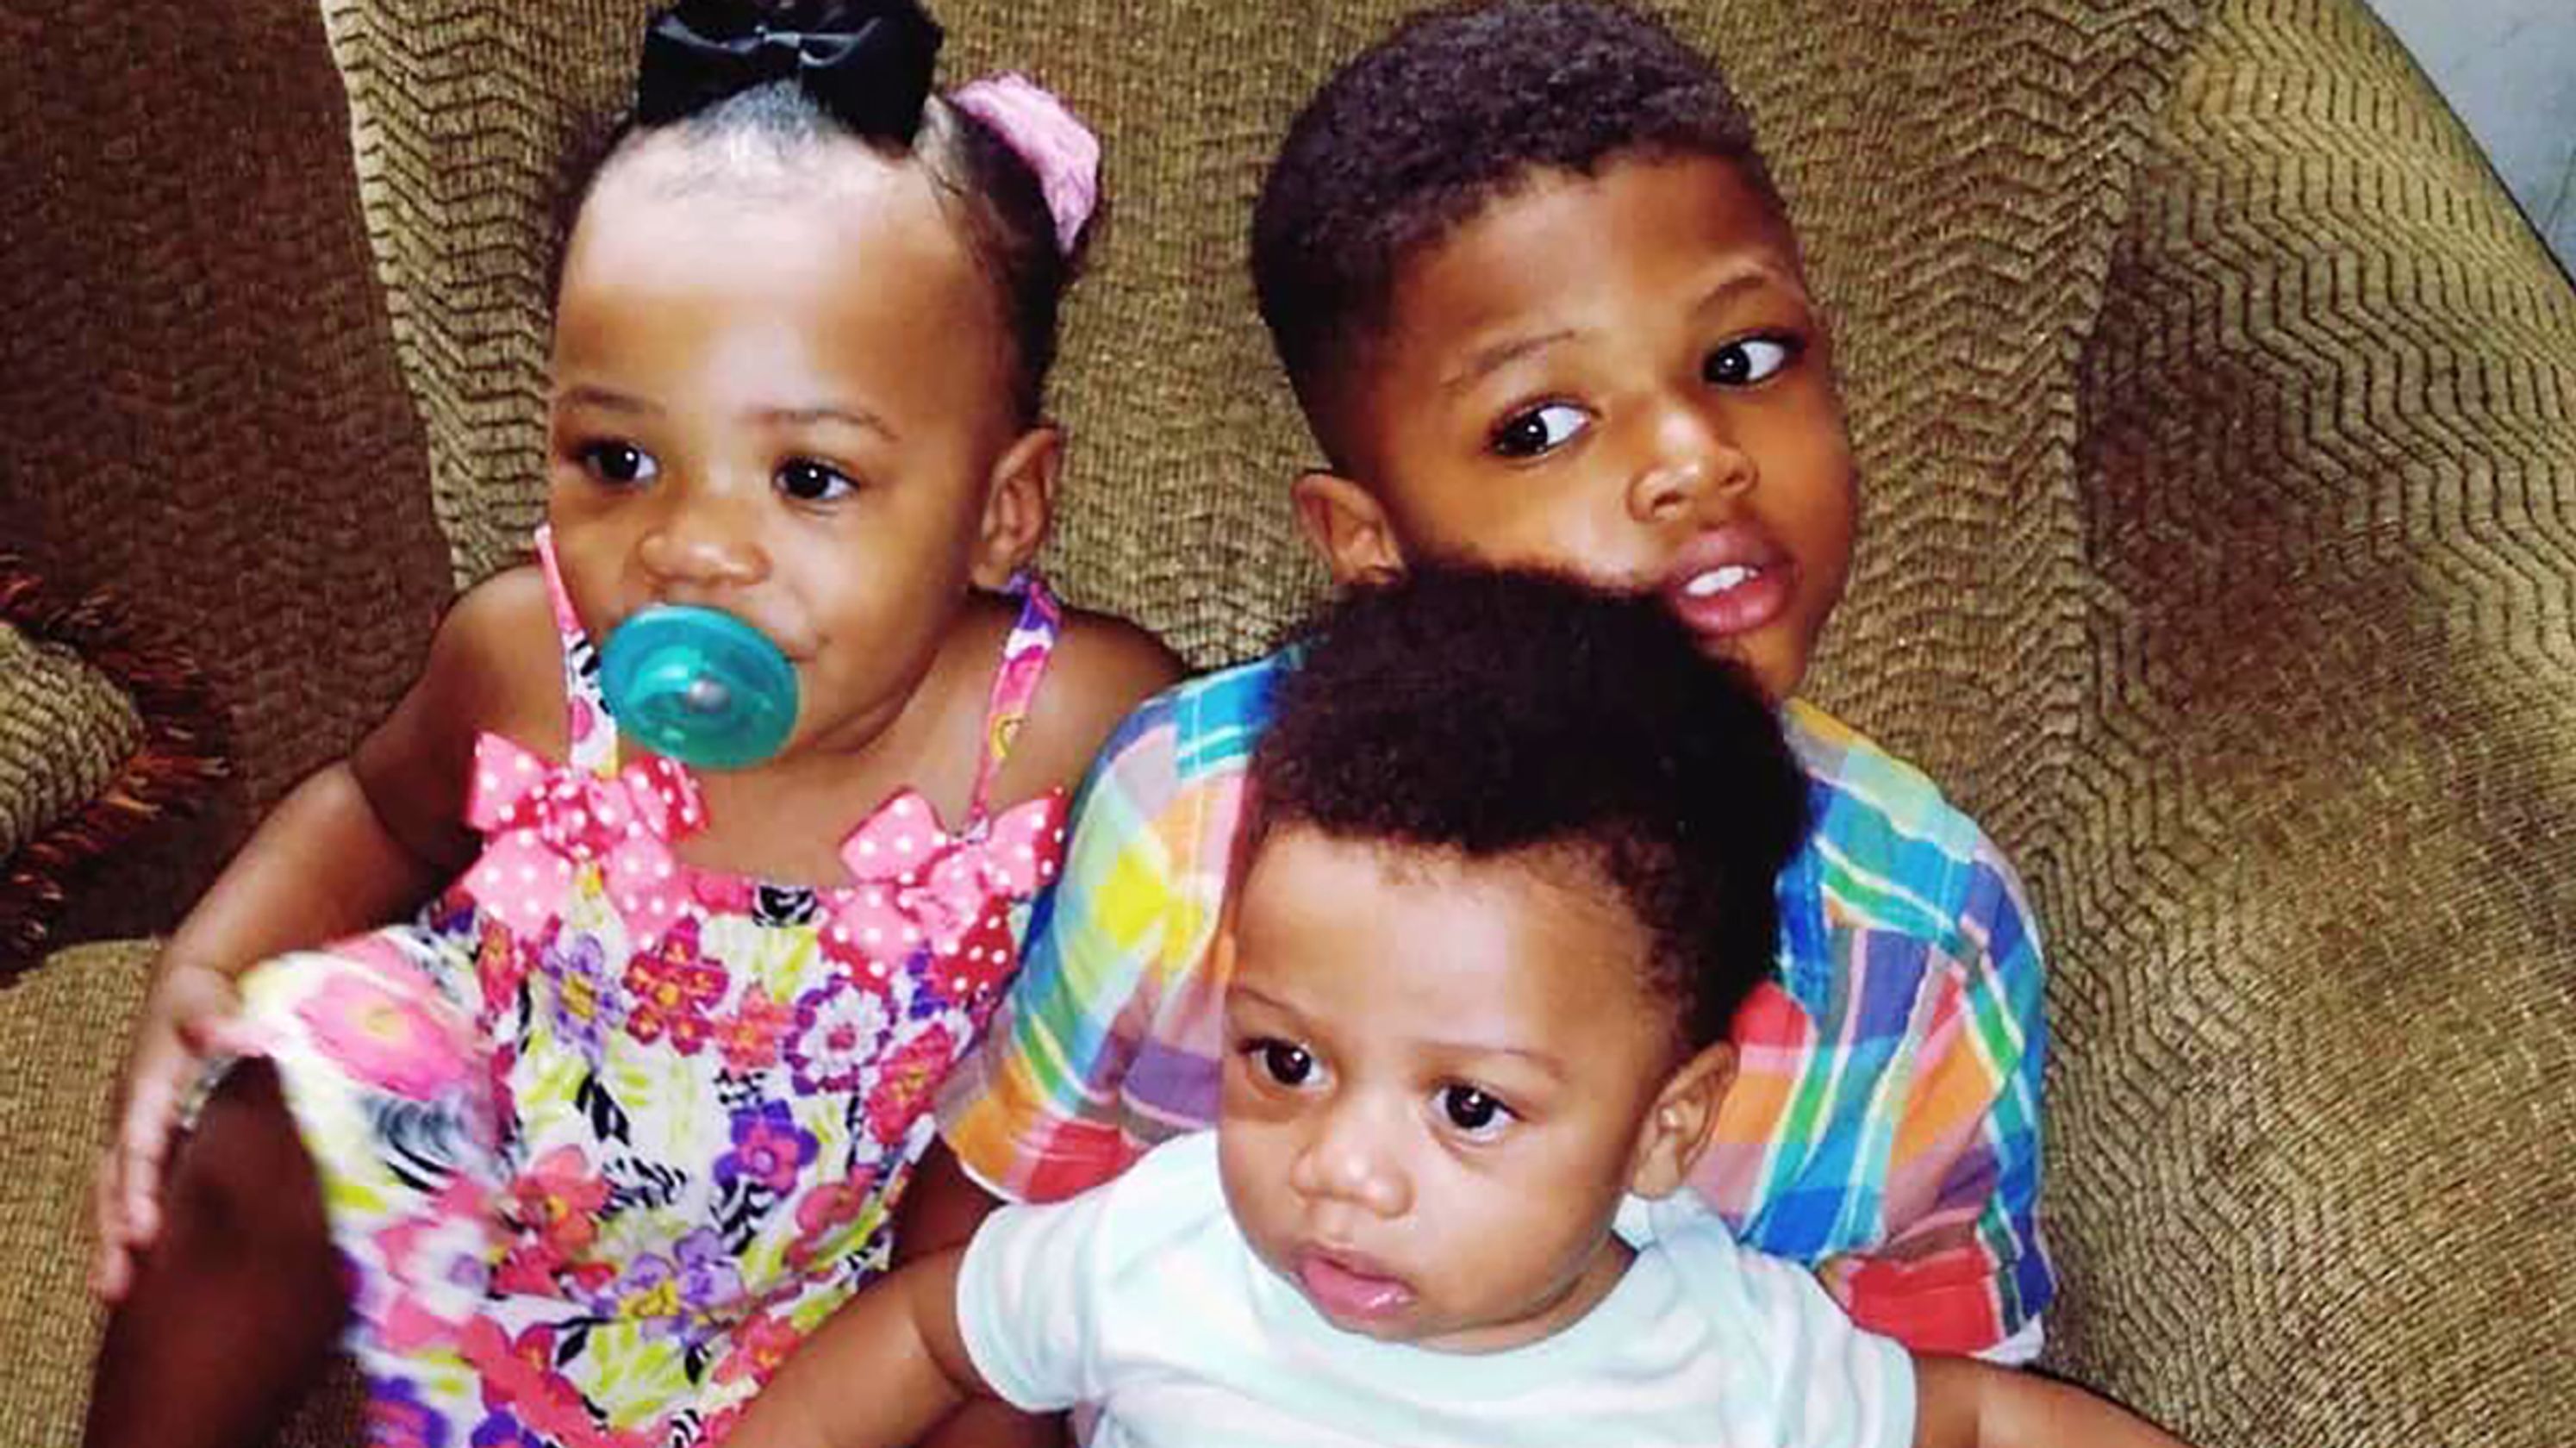 Children Drowned In a Locked Car that Drifted Into A Mississippi Creek